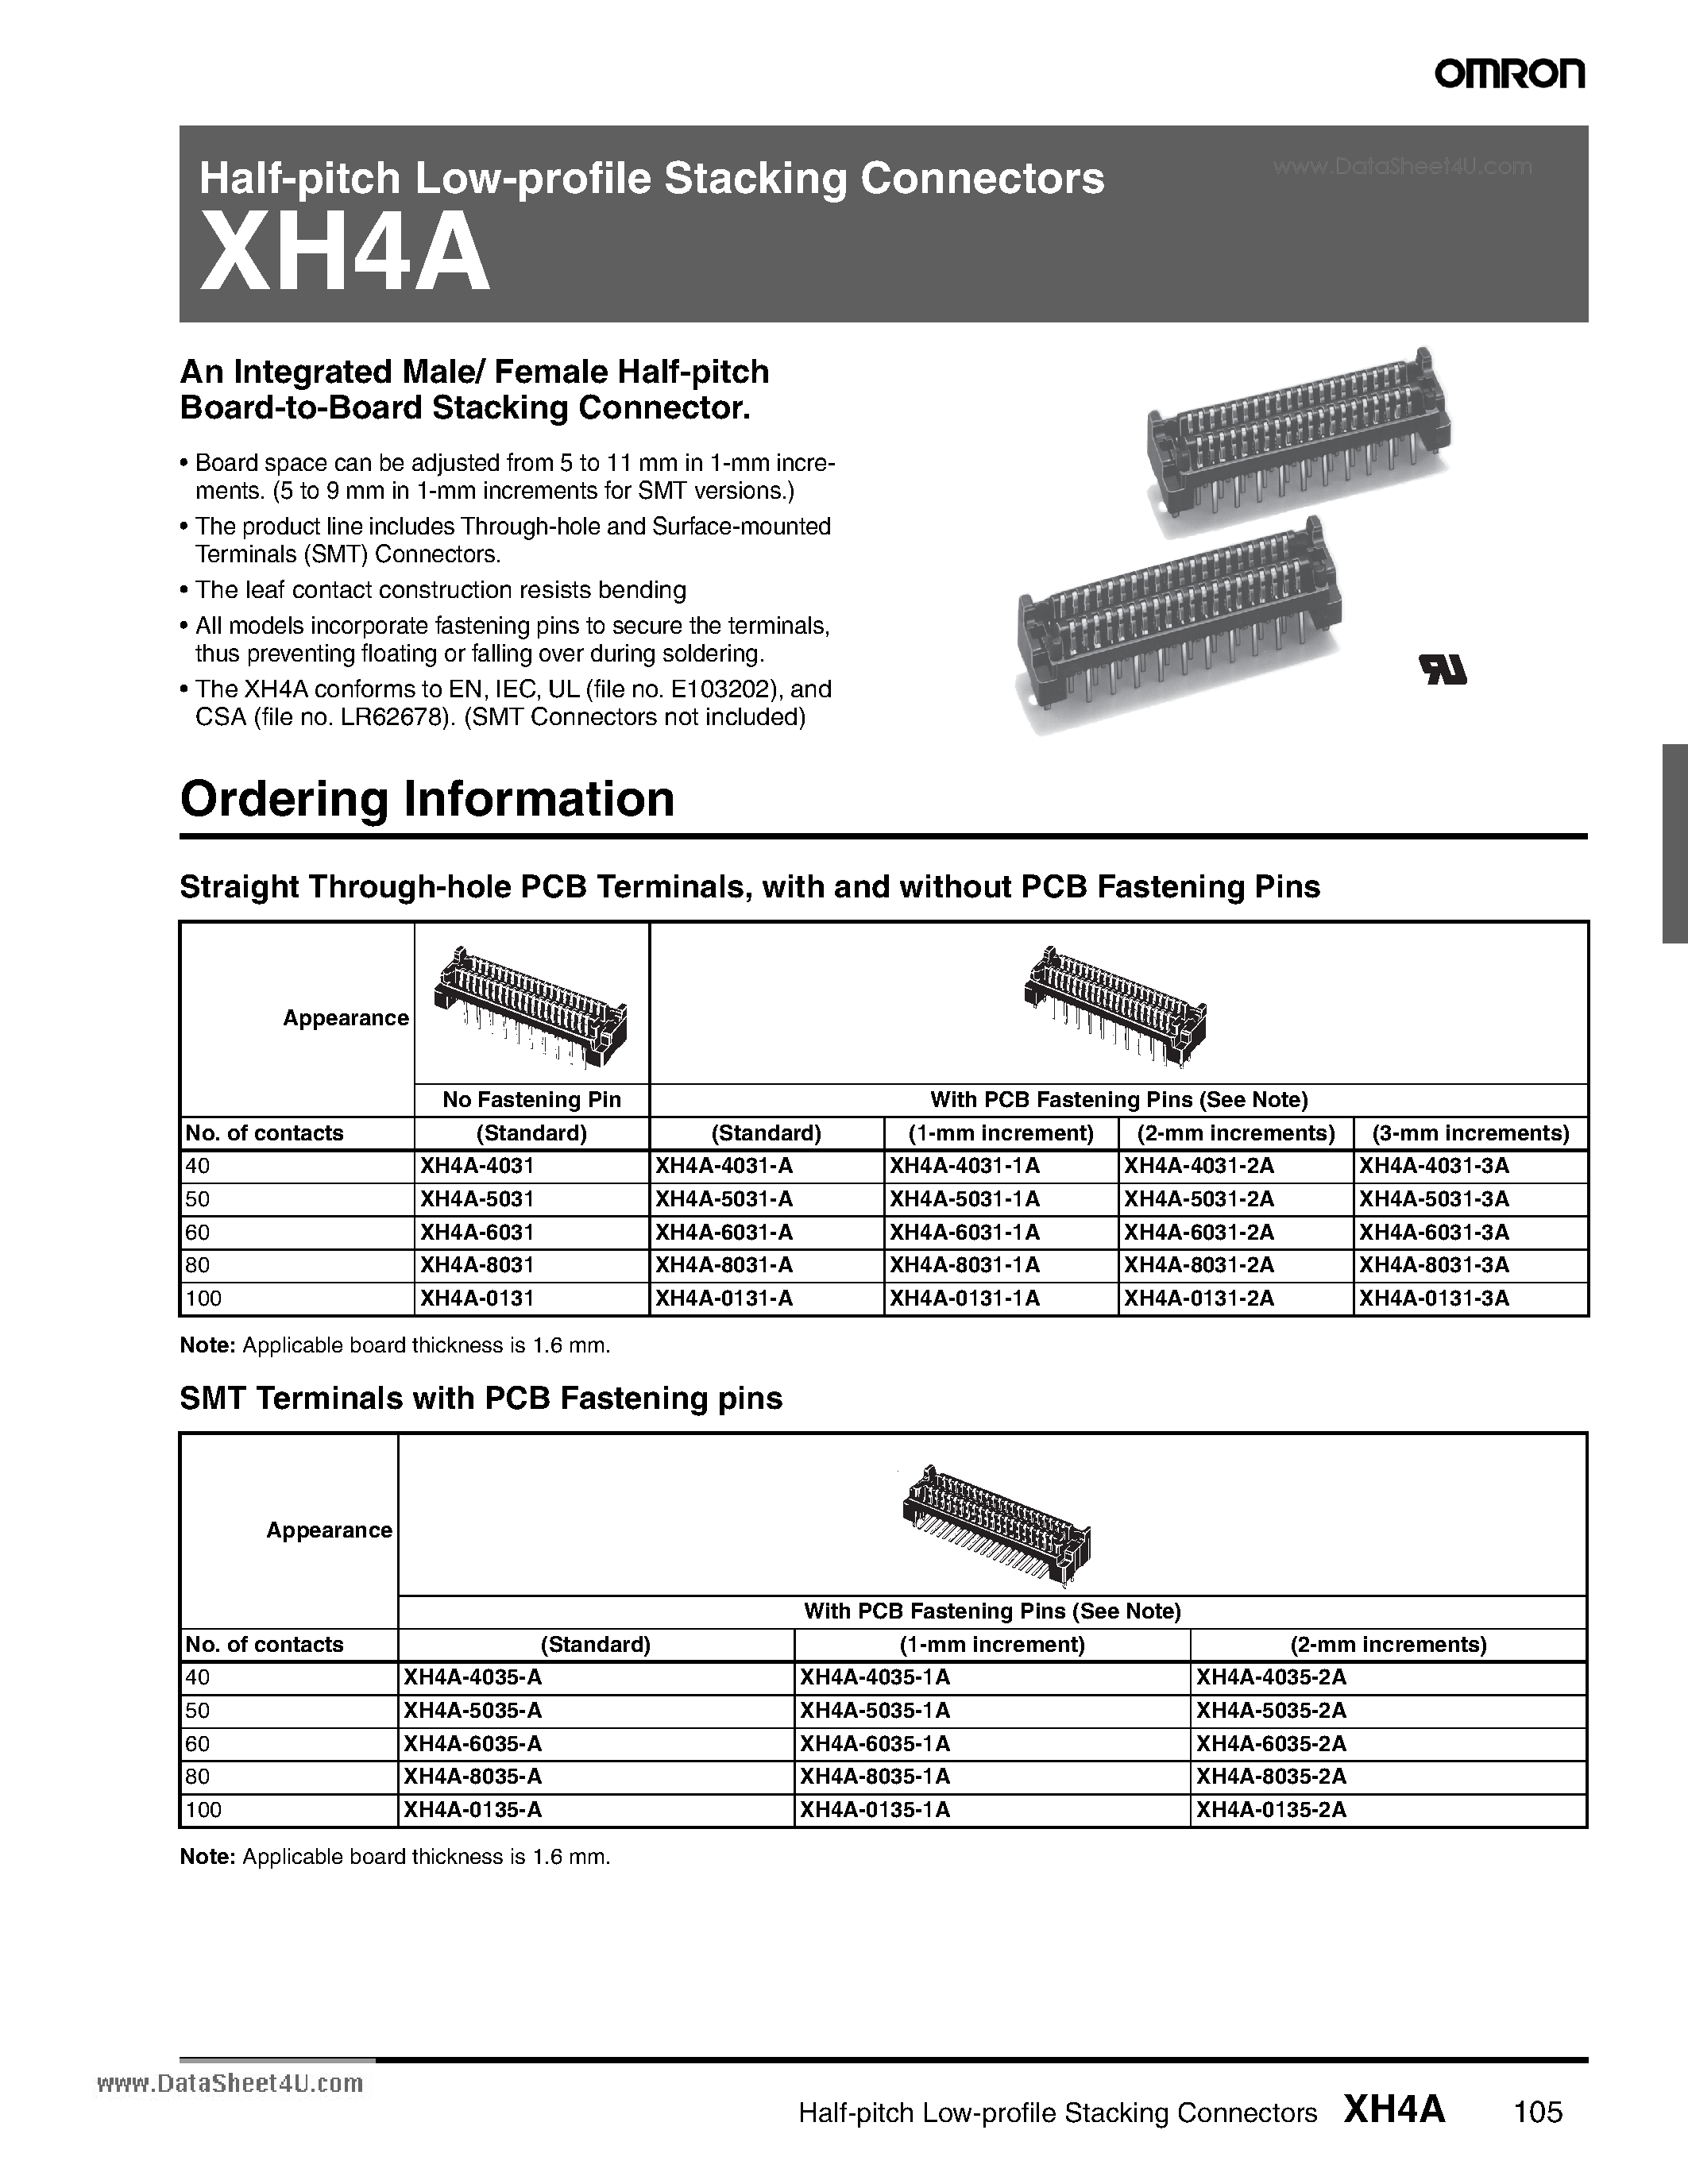 Даташит XH4A - Half-pitch Low-profile Stacking Connectors страница 1